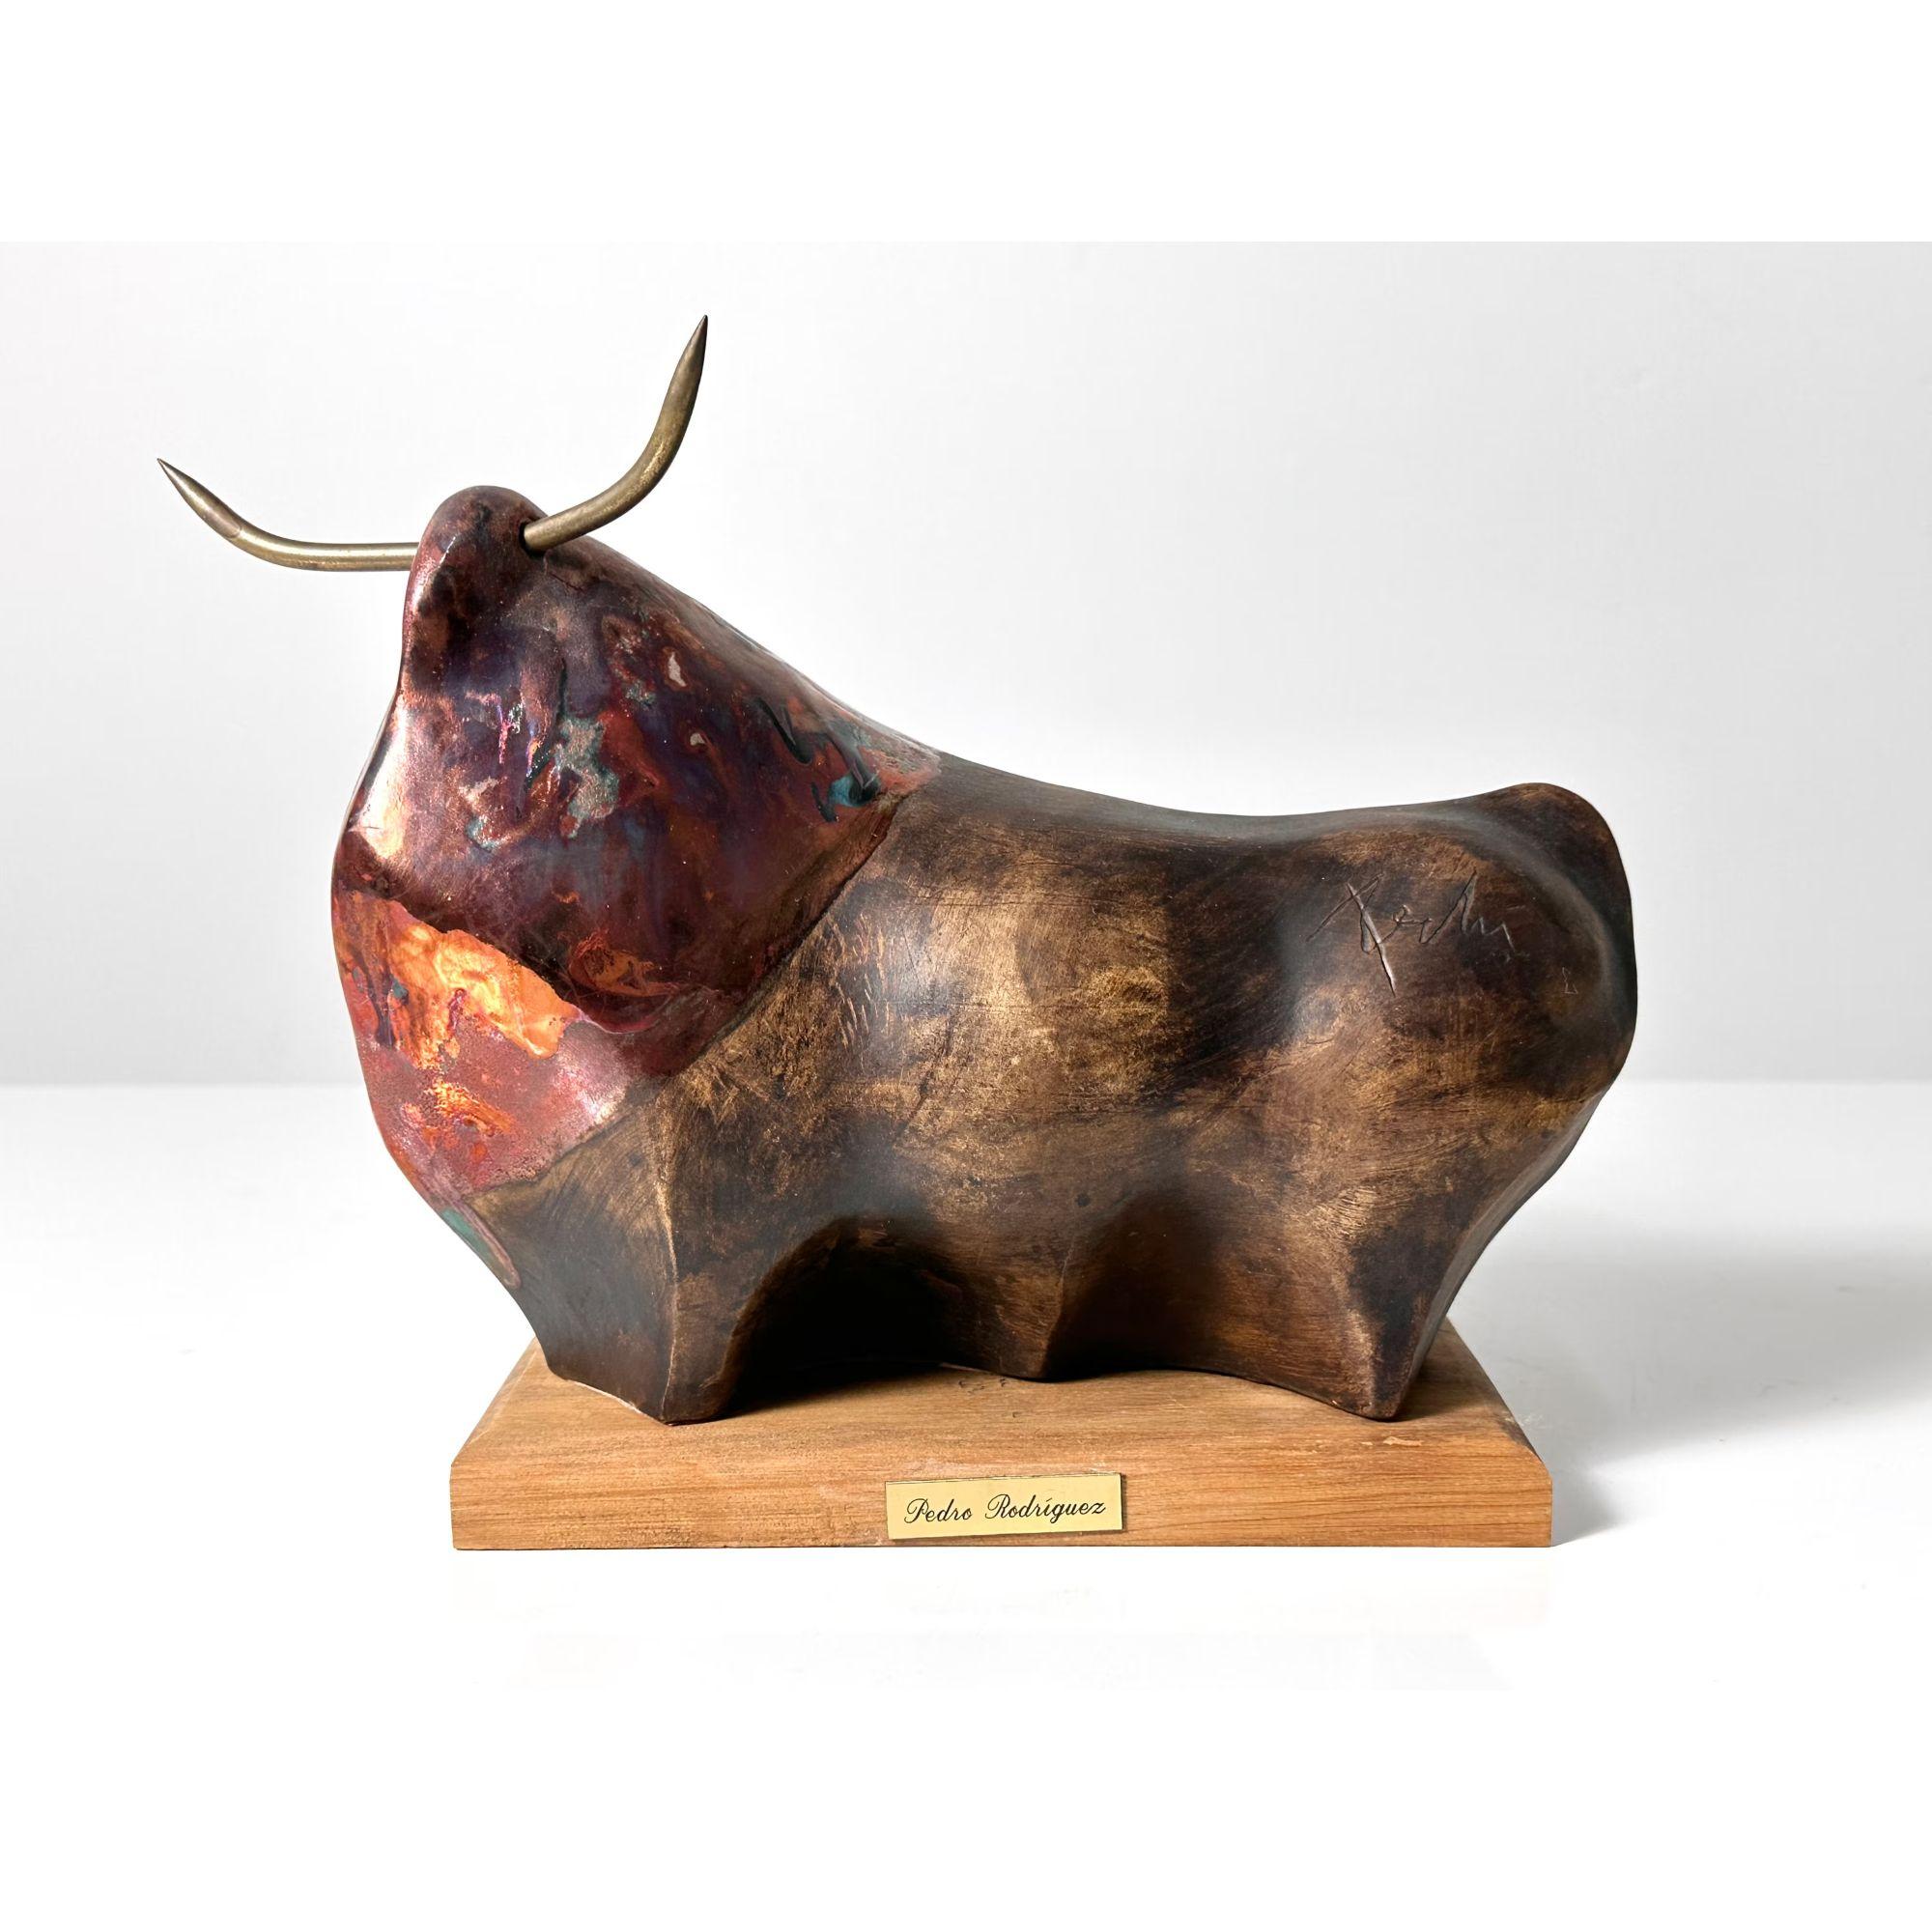 Vintage Pedrin Pedro Rodriguez Bull Sculpture Spanish 1990s

Stylized bull sculpture by Spanish artist Pedrin or Pedro Rodriguez circa 1990s
Executed in resin with metallic glaze and brass horns
Signed to the piece and base

Additional